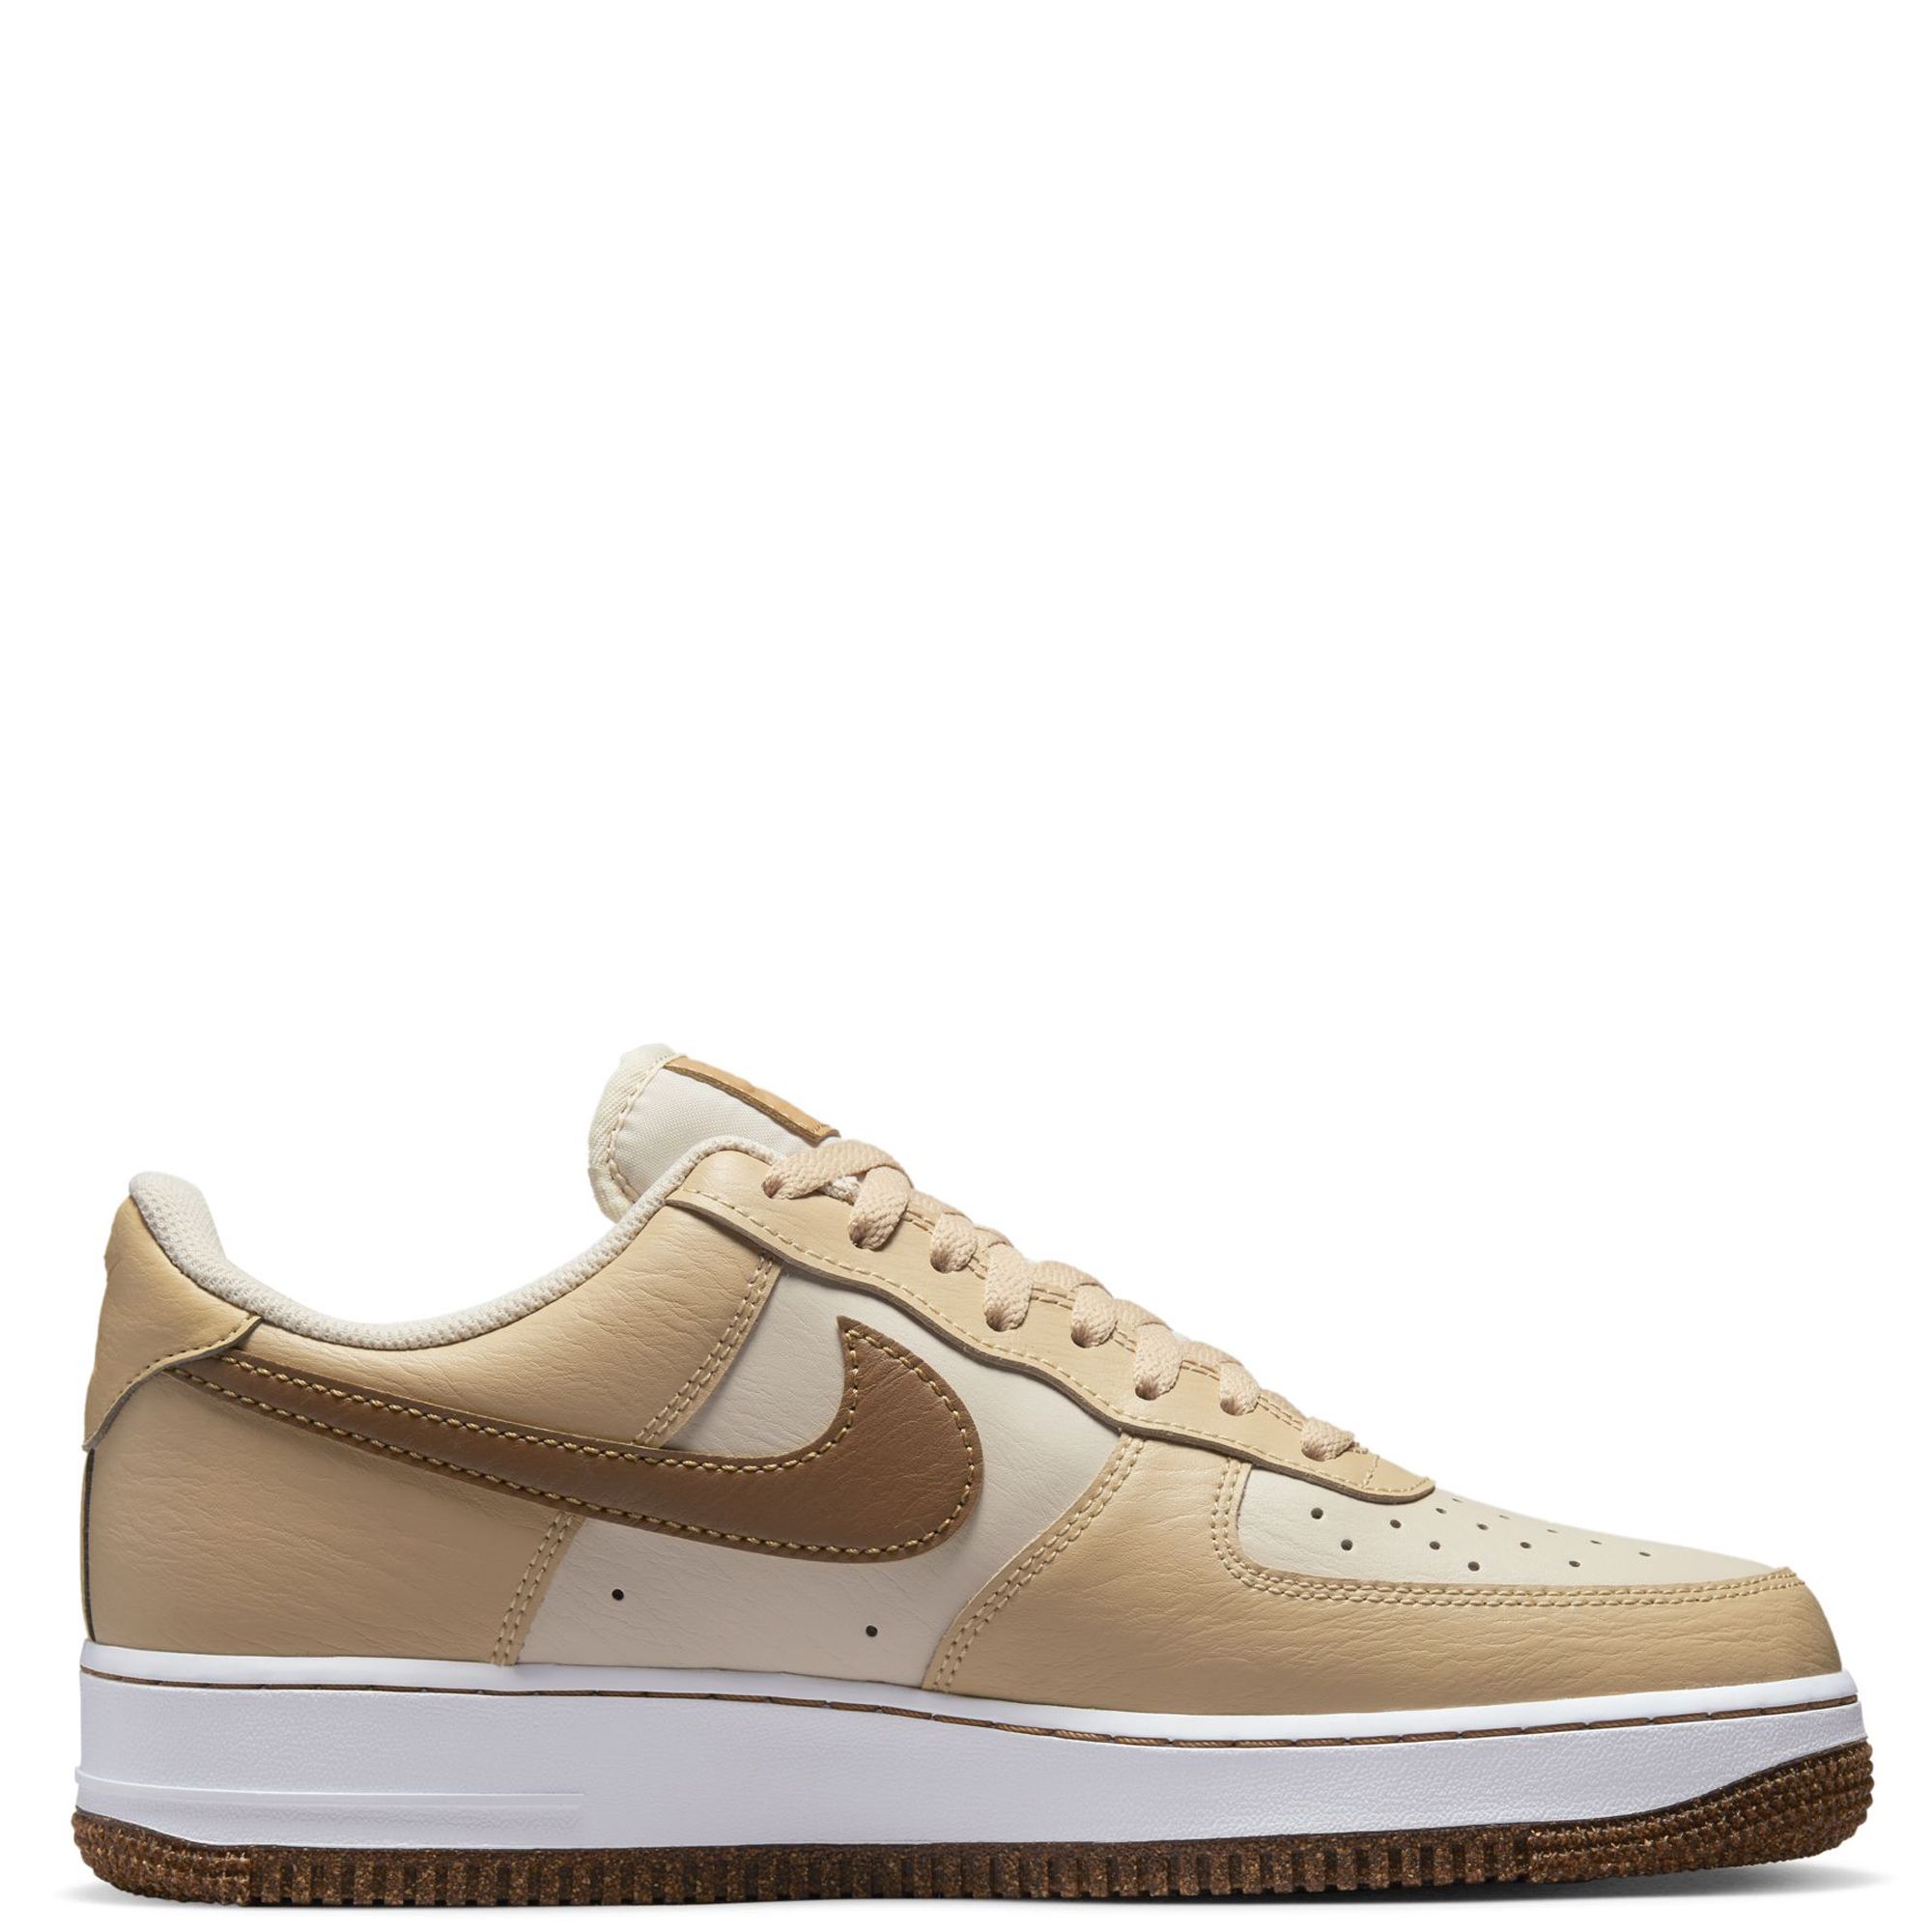 Nike Air Force 1 '07 ESS sneakers in white and brown